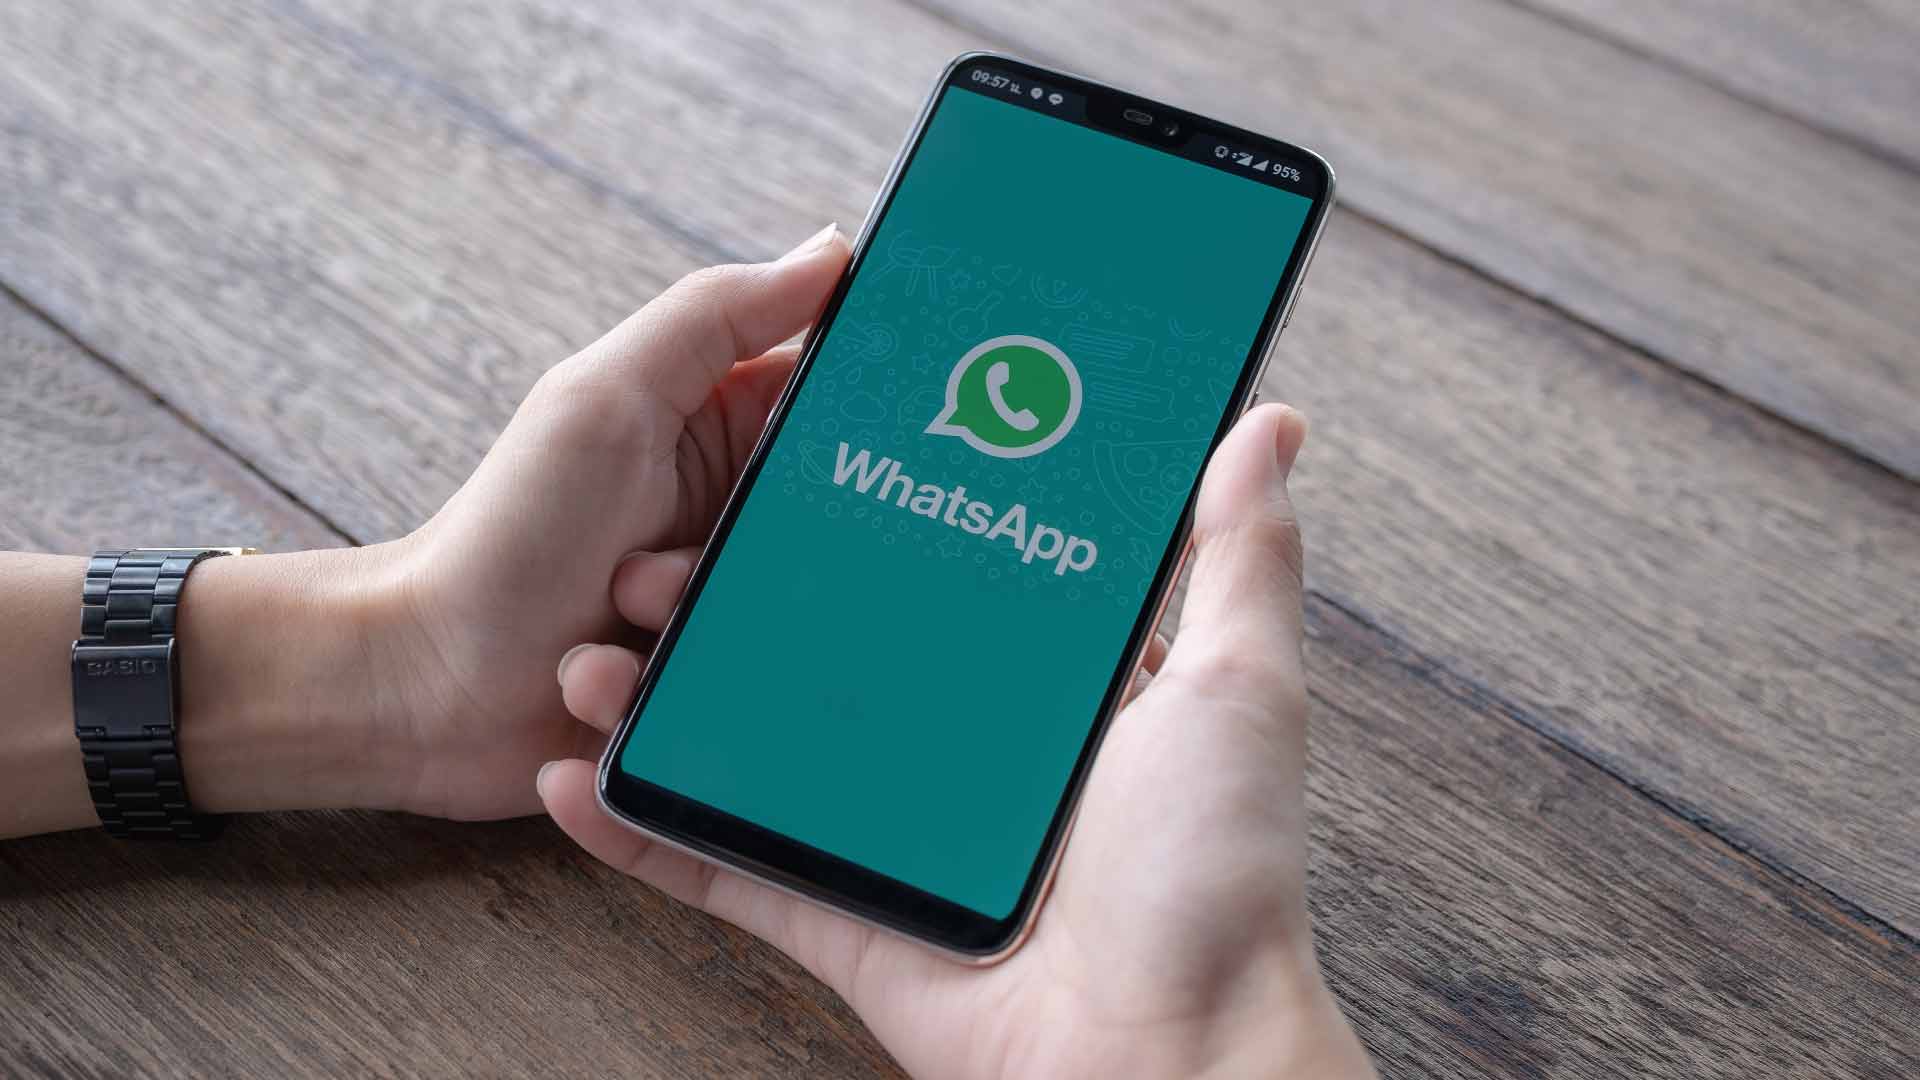 Omnichannel WhatsApp: how to unify customer service?